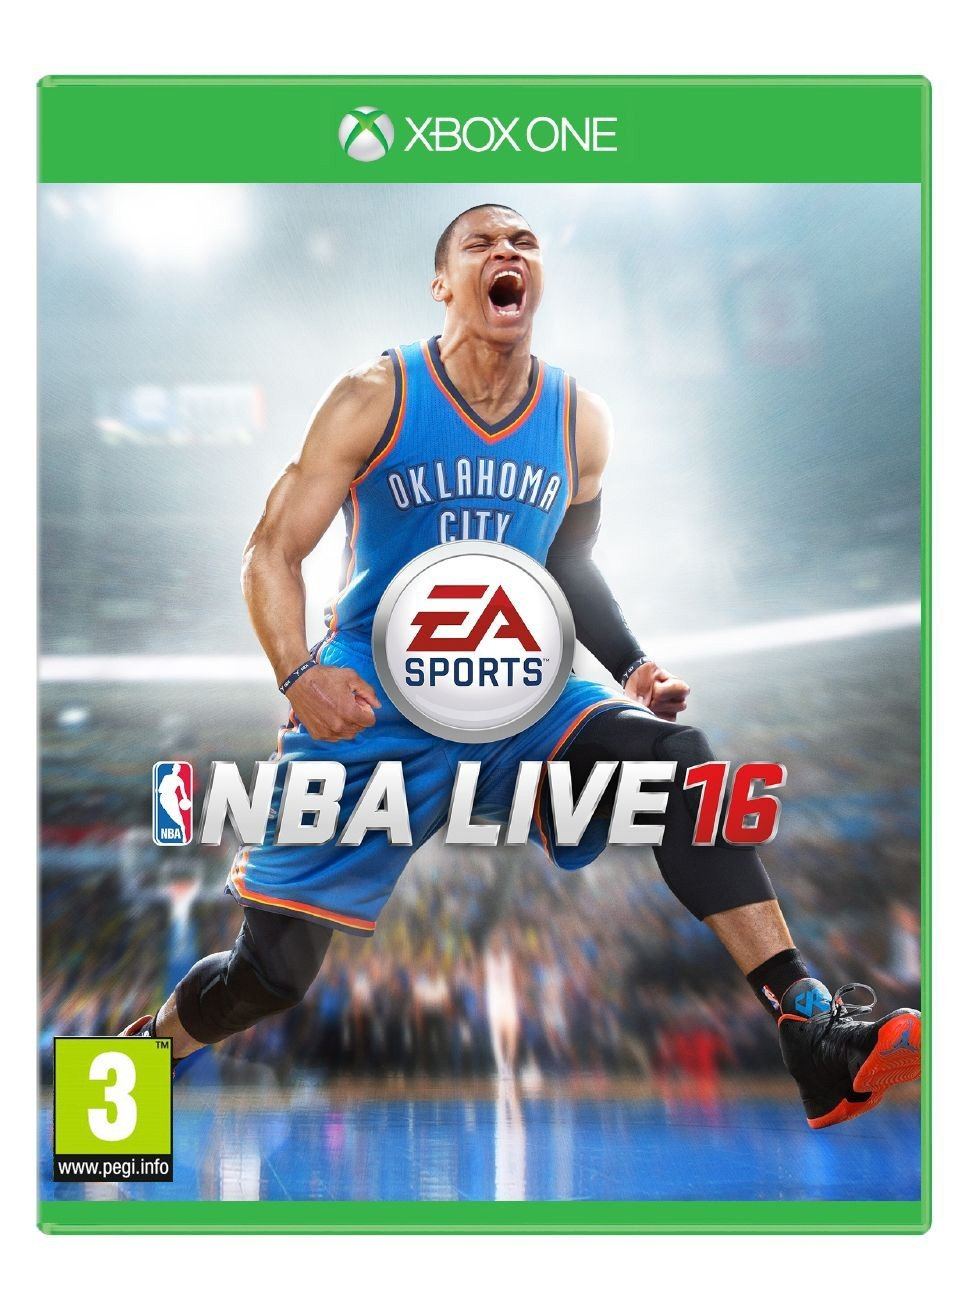 NBA Live 16 for Xbox One